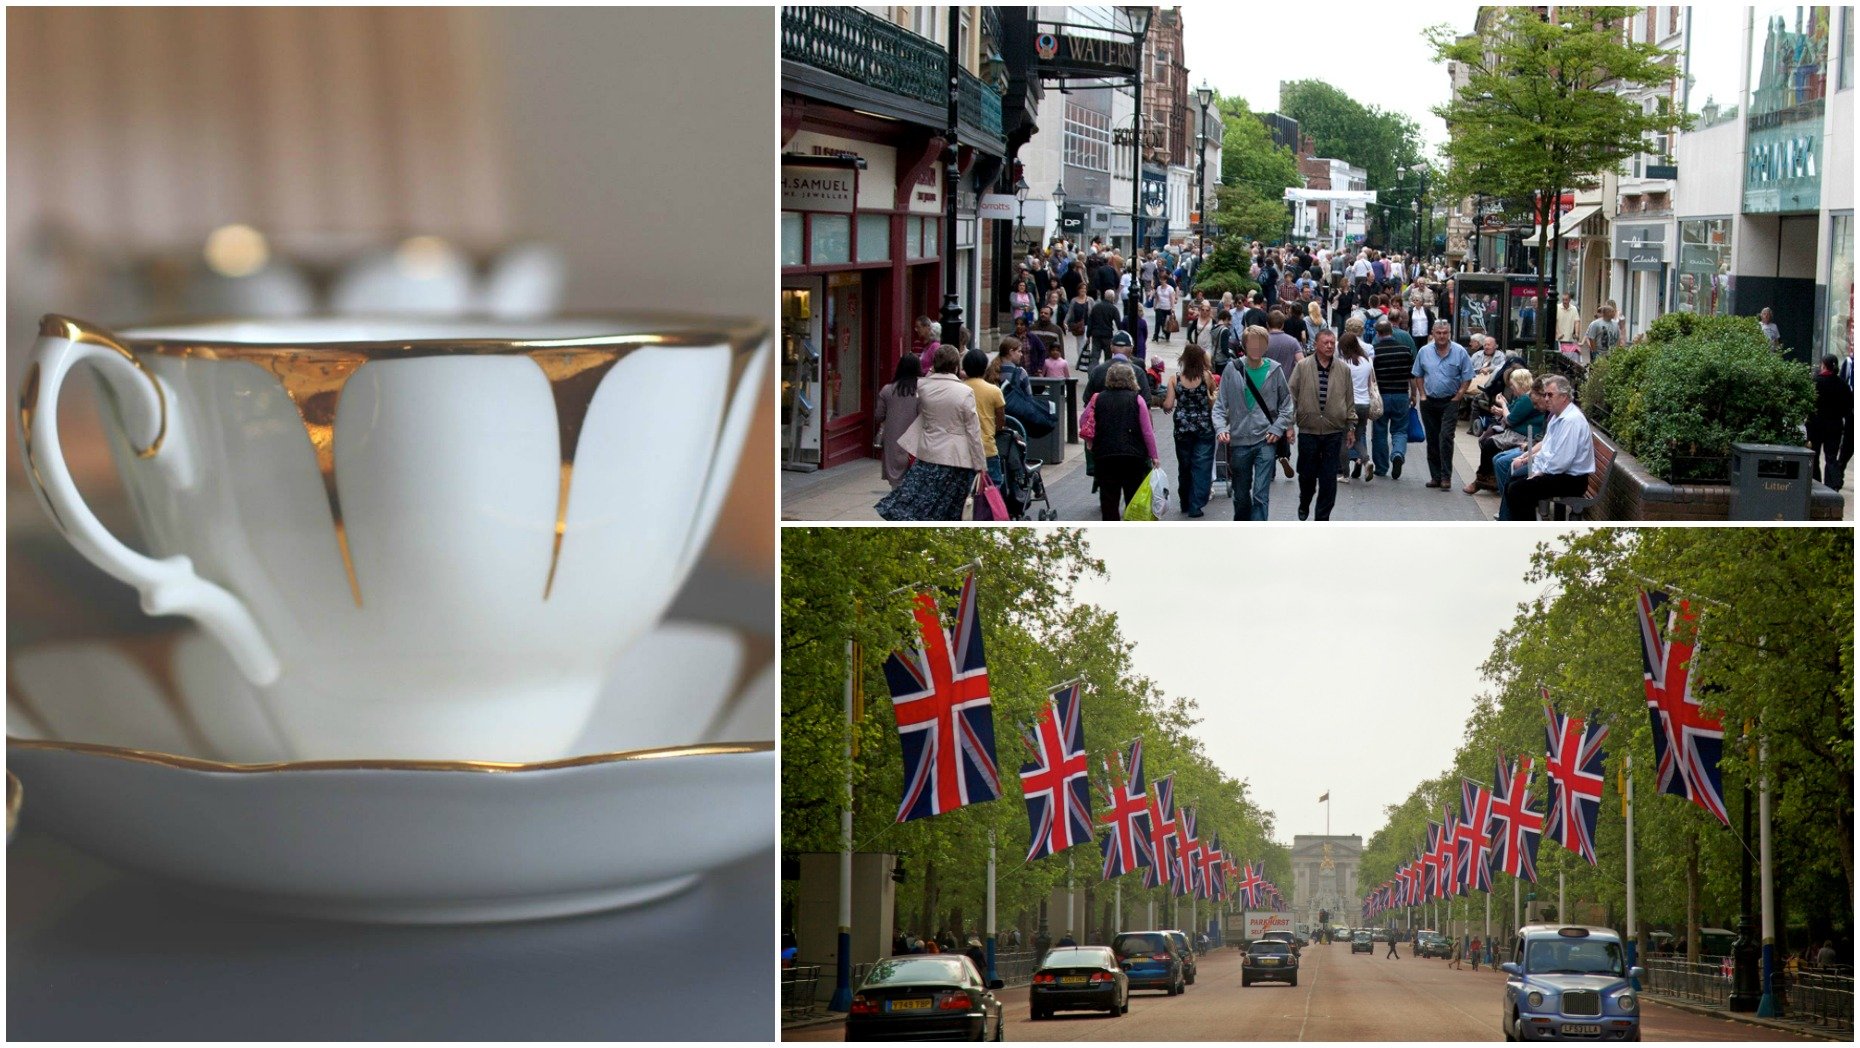 A special tea party will be hosted on Lincoln High Street for the Queen's 90th birthday. 